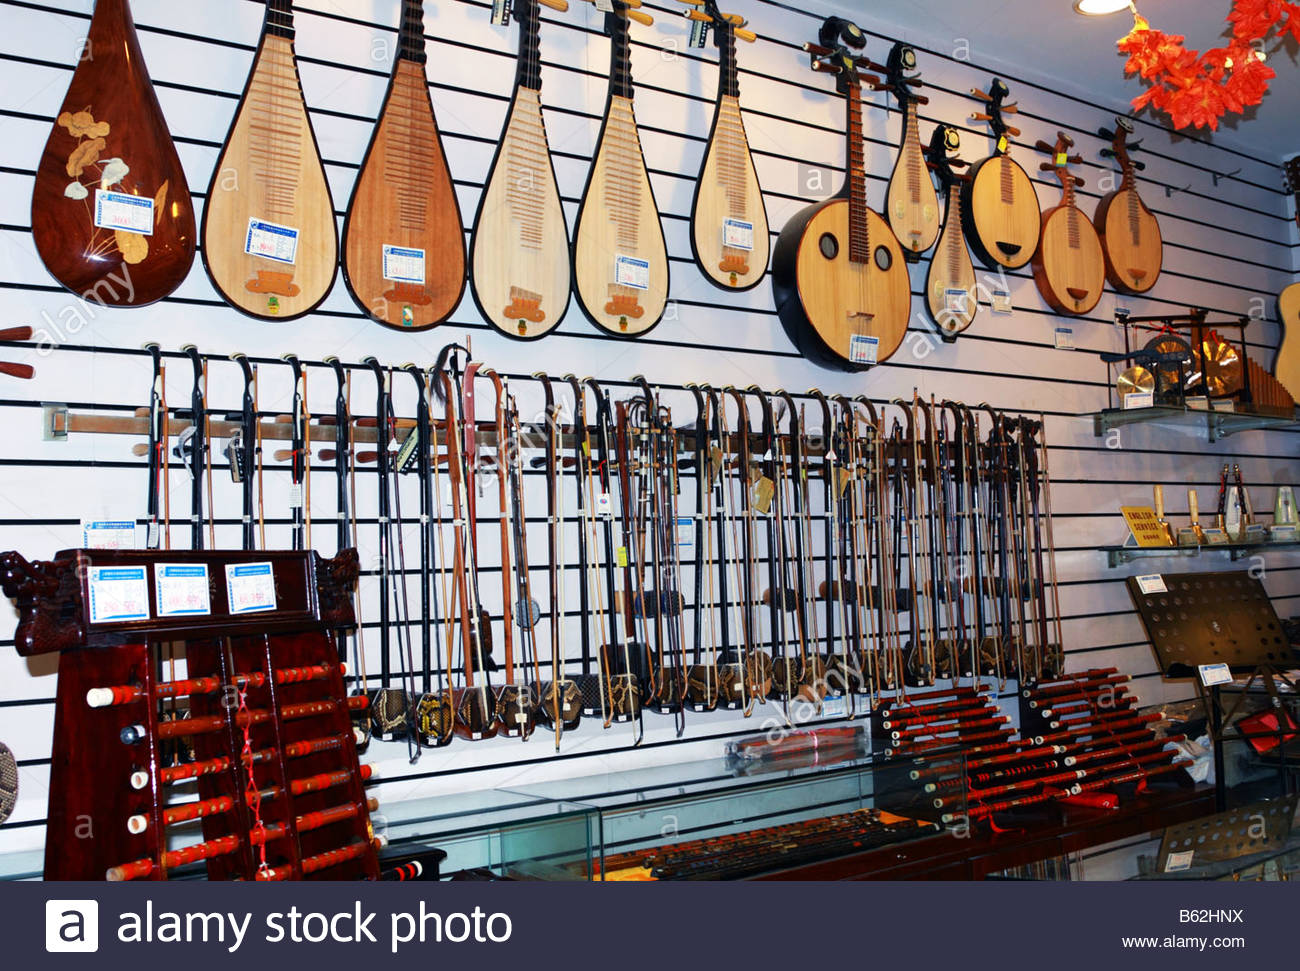 traditional chinese music instruments